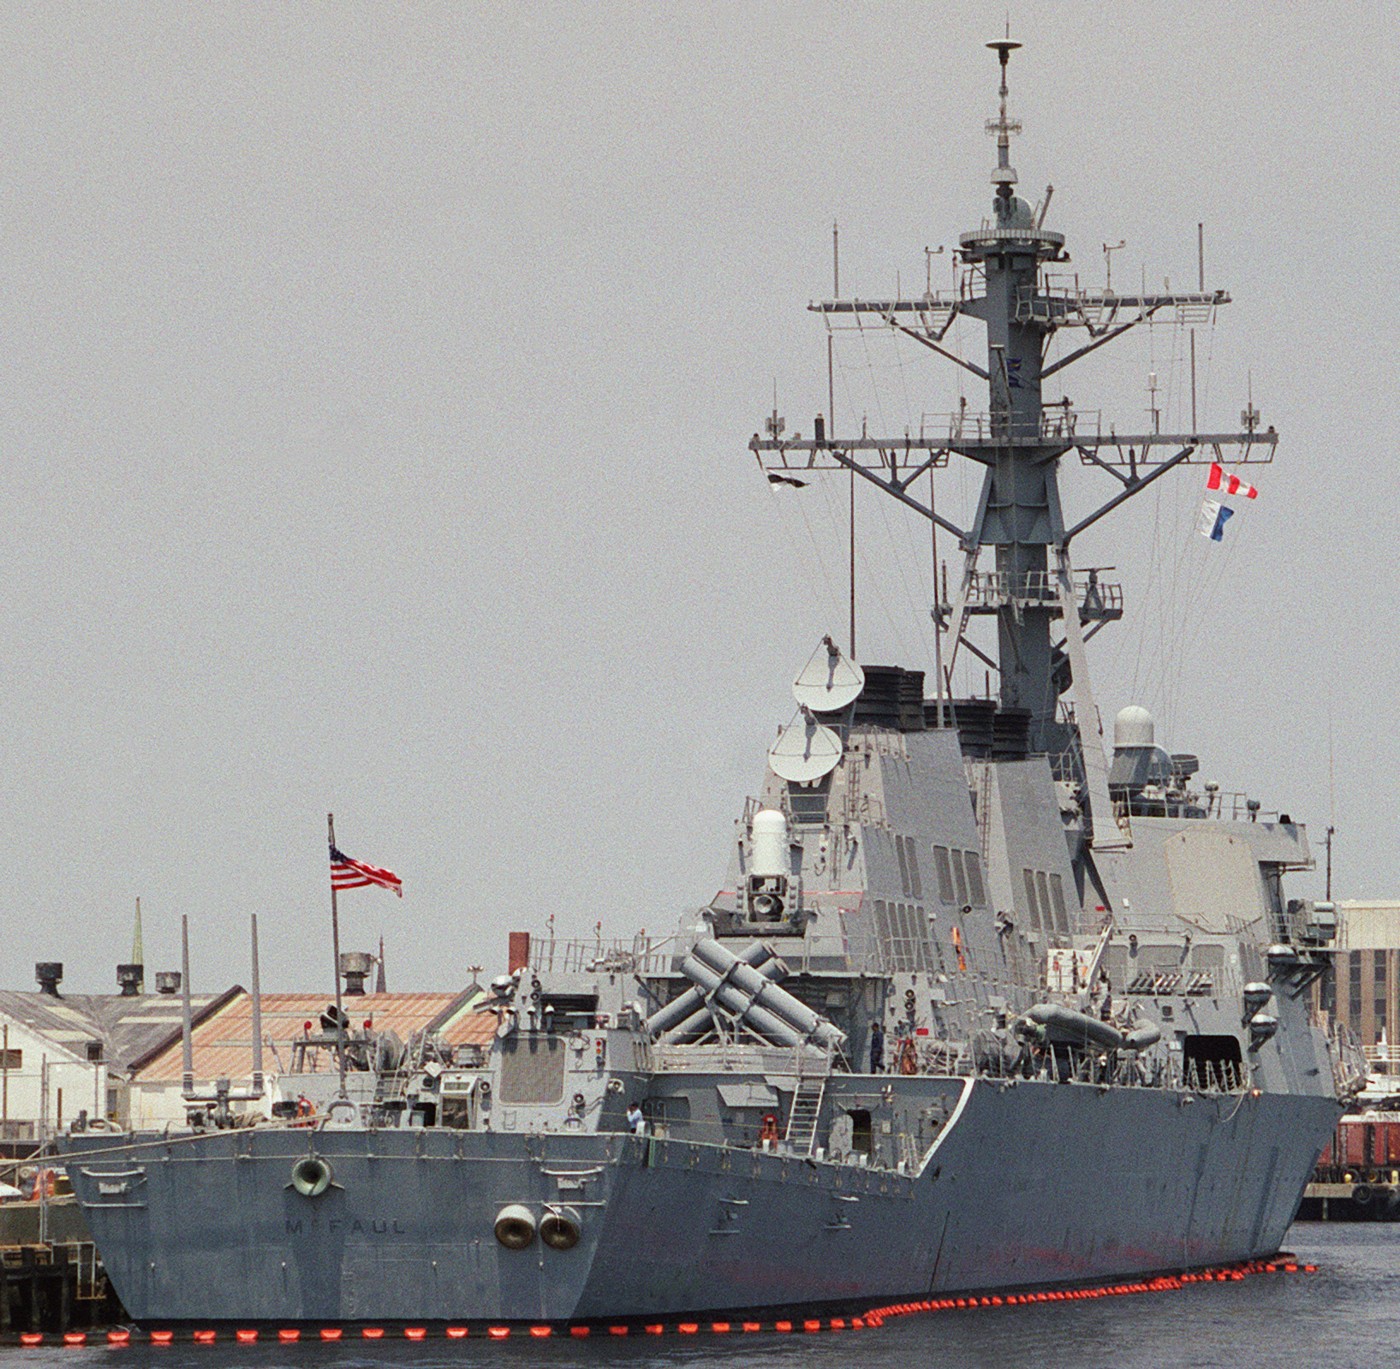 ddg-74 uss mcfaul guided missile destroyer arleigh burke class aegis bmd 58